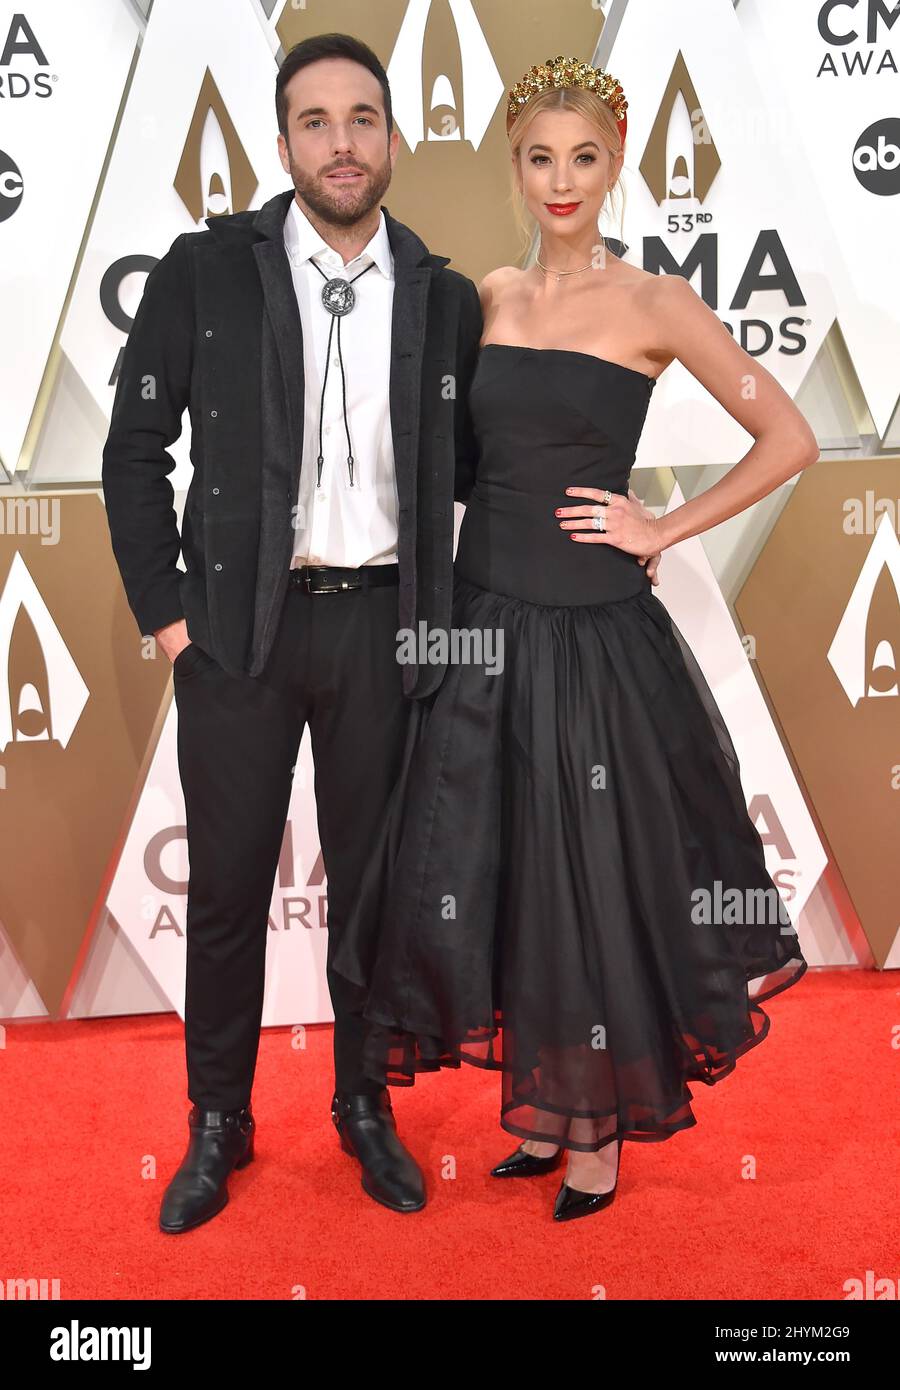 Tyler Rich and Sabina Gadecki arriving to the 53rd Annual CMA Awards held at Bridgestone Arena on November 13, 2019 in Nashville, USA. Stock Photo